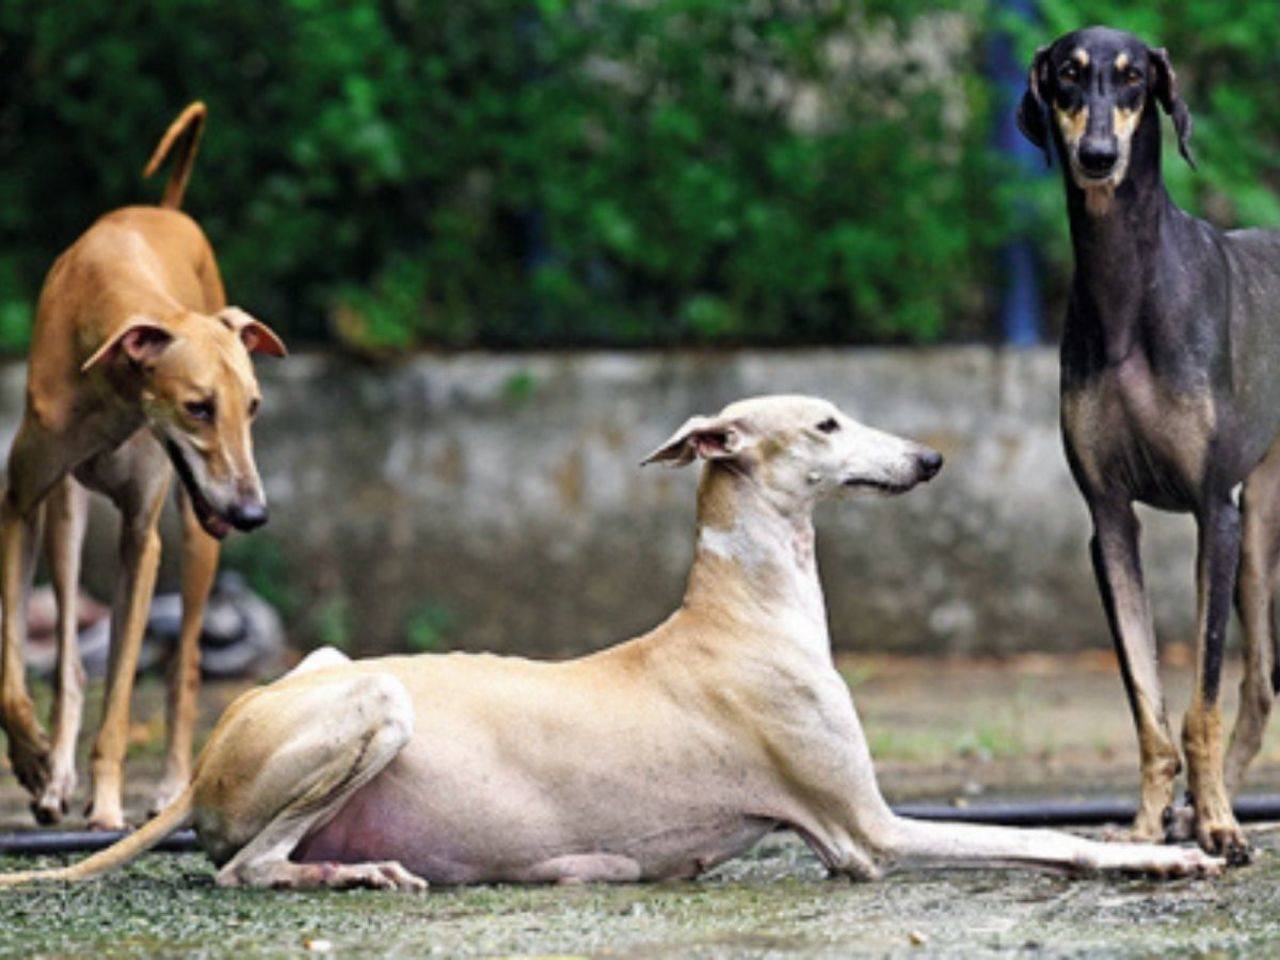 After PM's 'Mann ki Baat', queries pour in for Tamil Nadu hounds ...